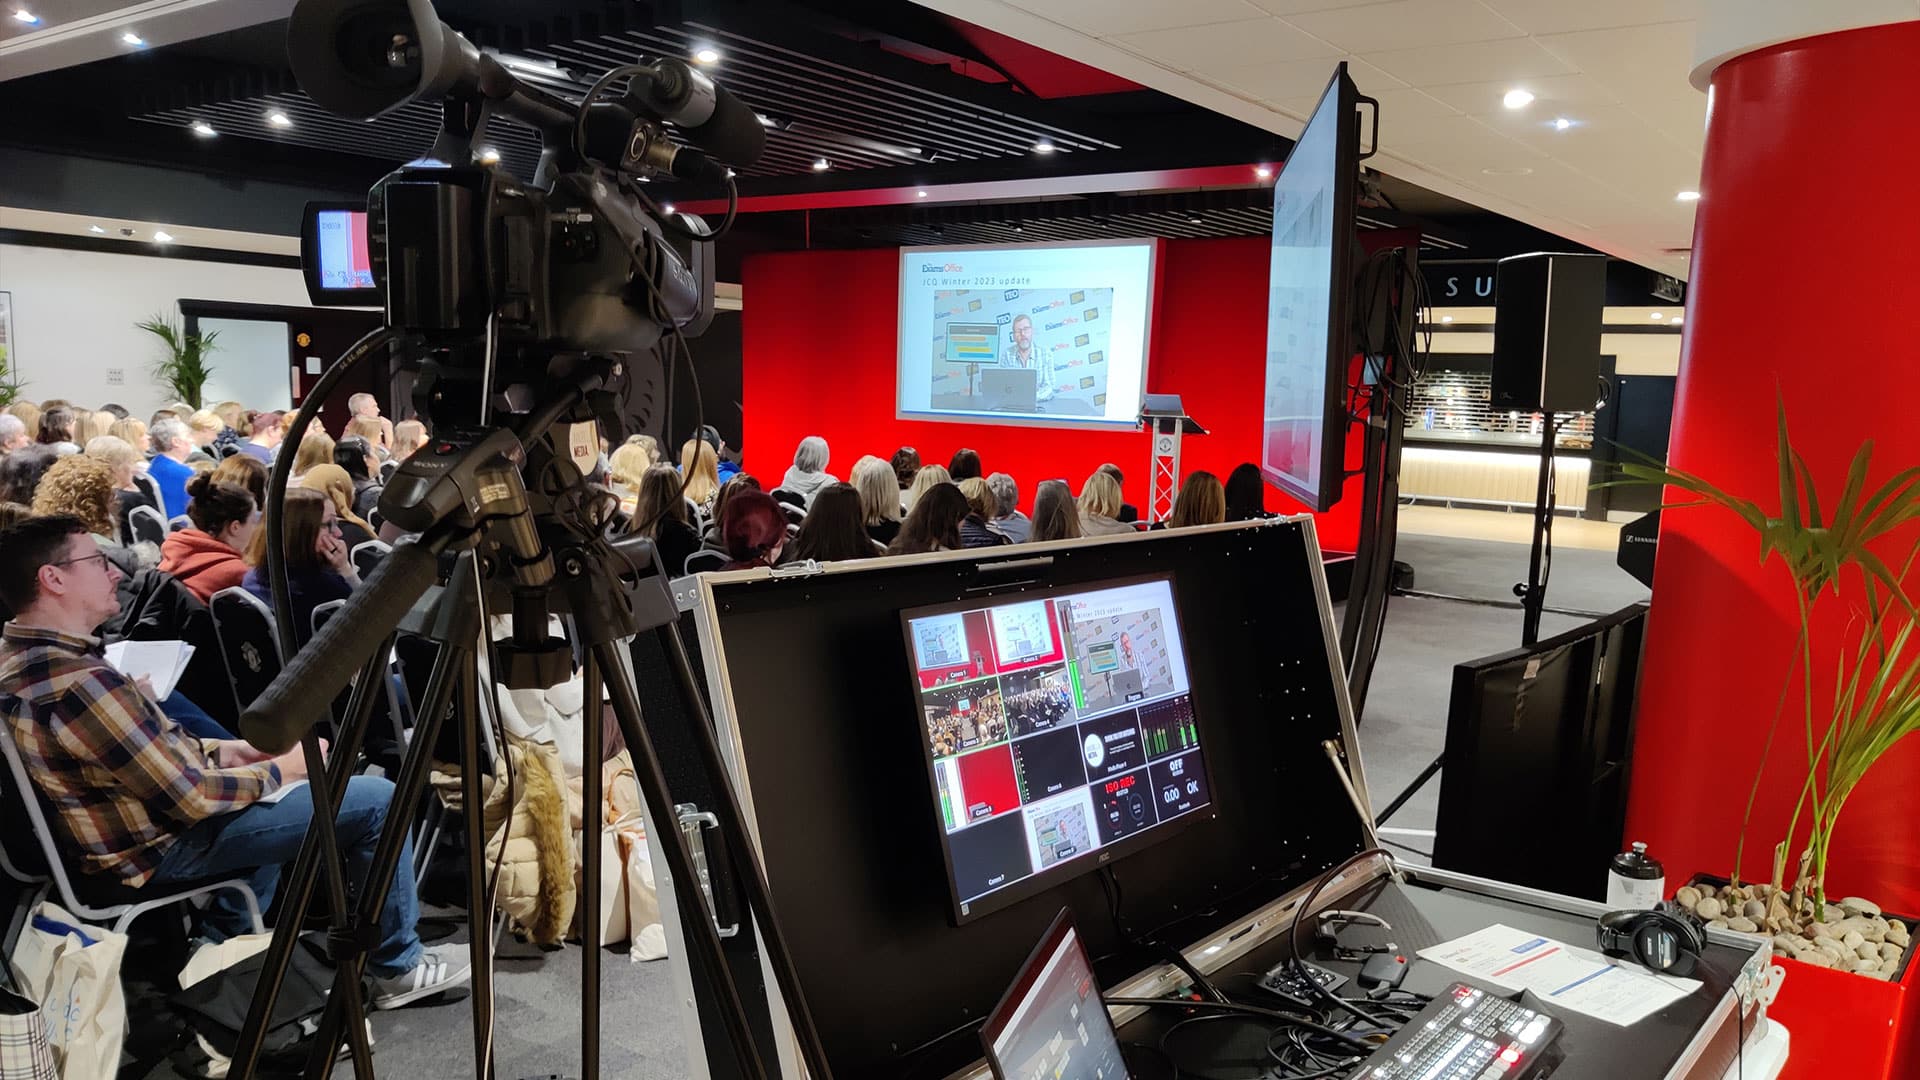 Exams Office Virtual Conference filmed at Old Trafford Football Ground in Manchester